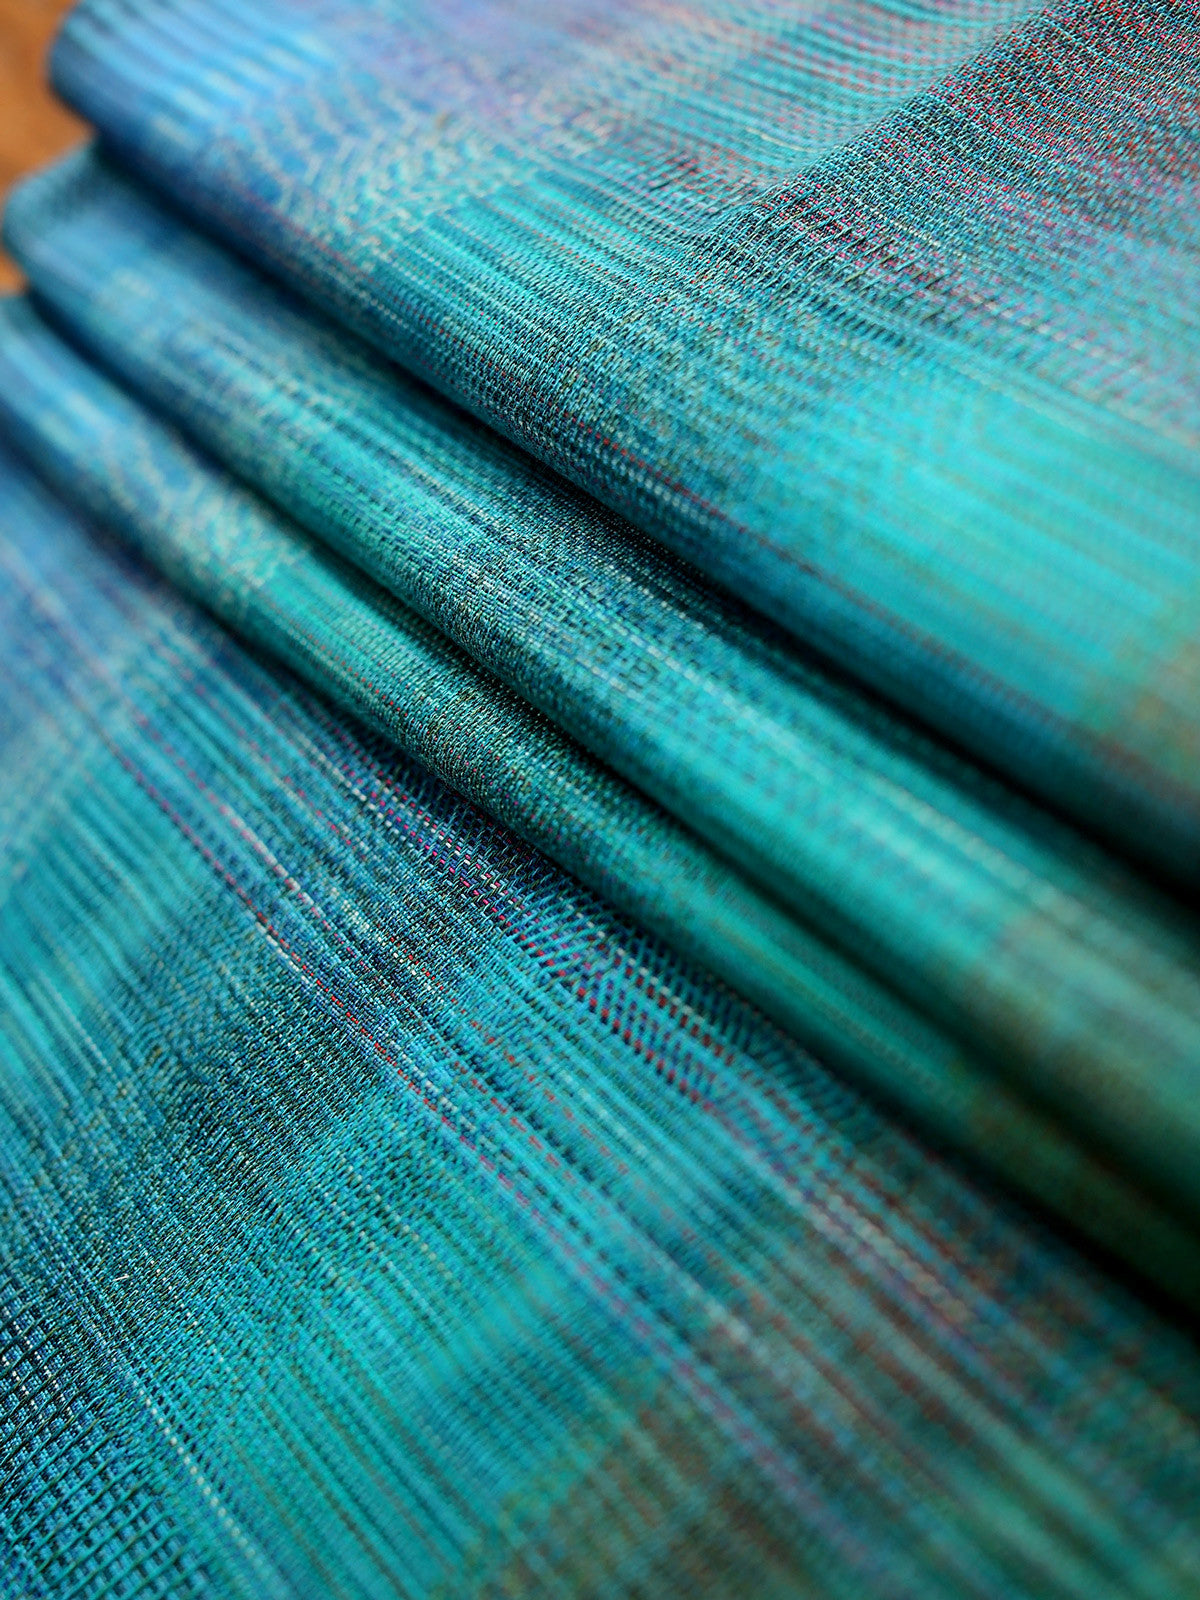 Colsie Weaves Fabric Pieces